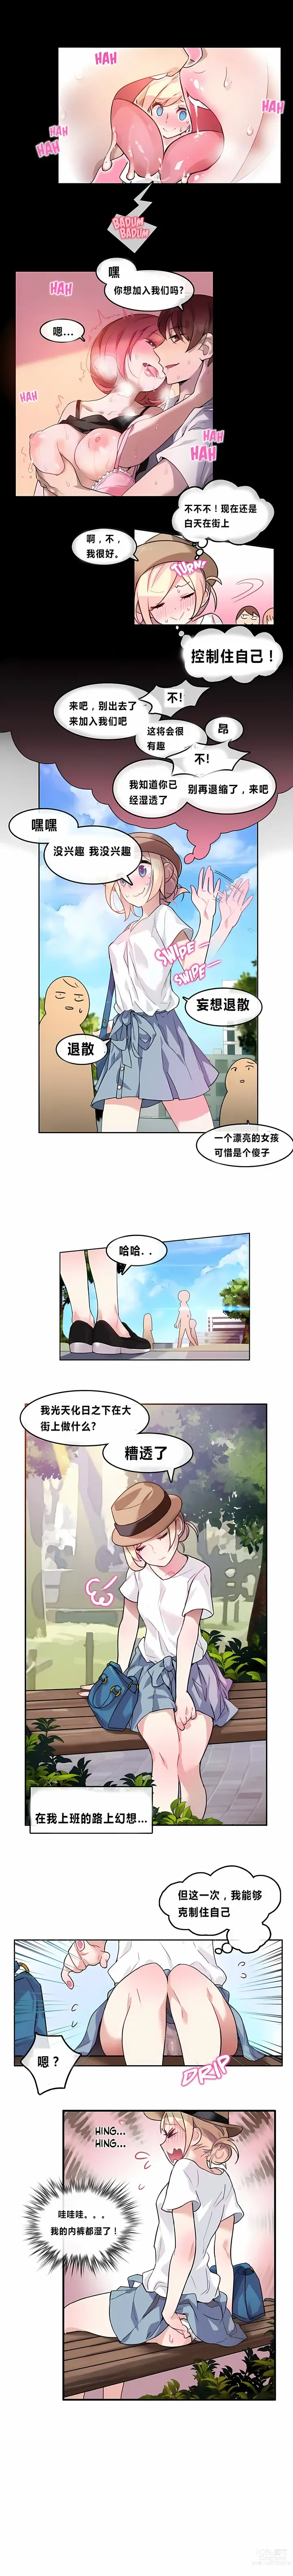 Page 12 of doujinshi A Pervert's Daily Life 第1-4季 1-144